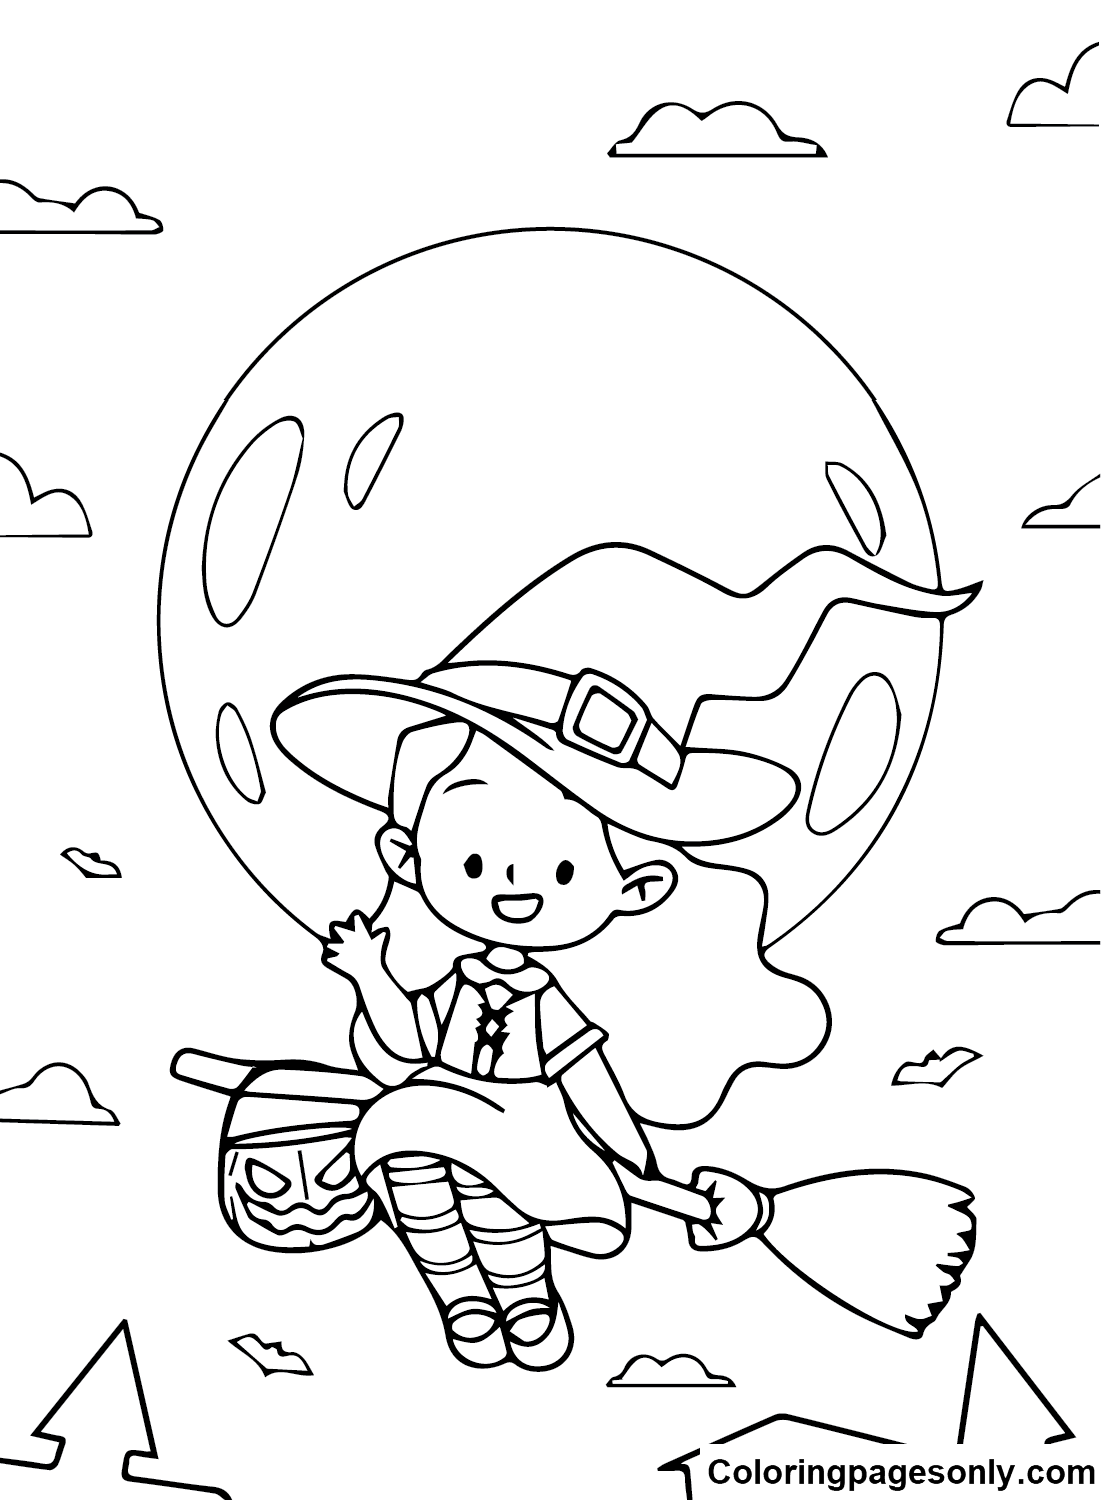 Hocus Pocus Witches Coloring Page